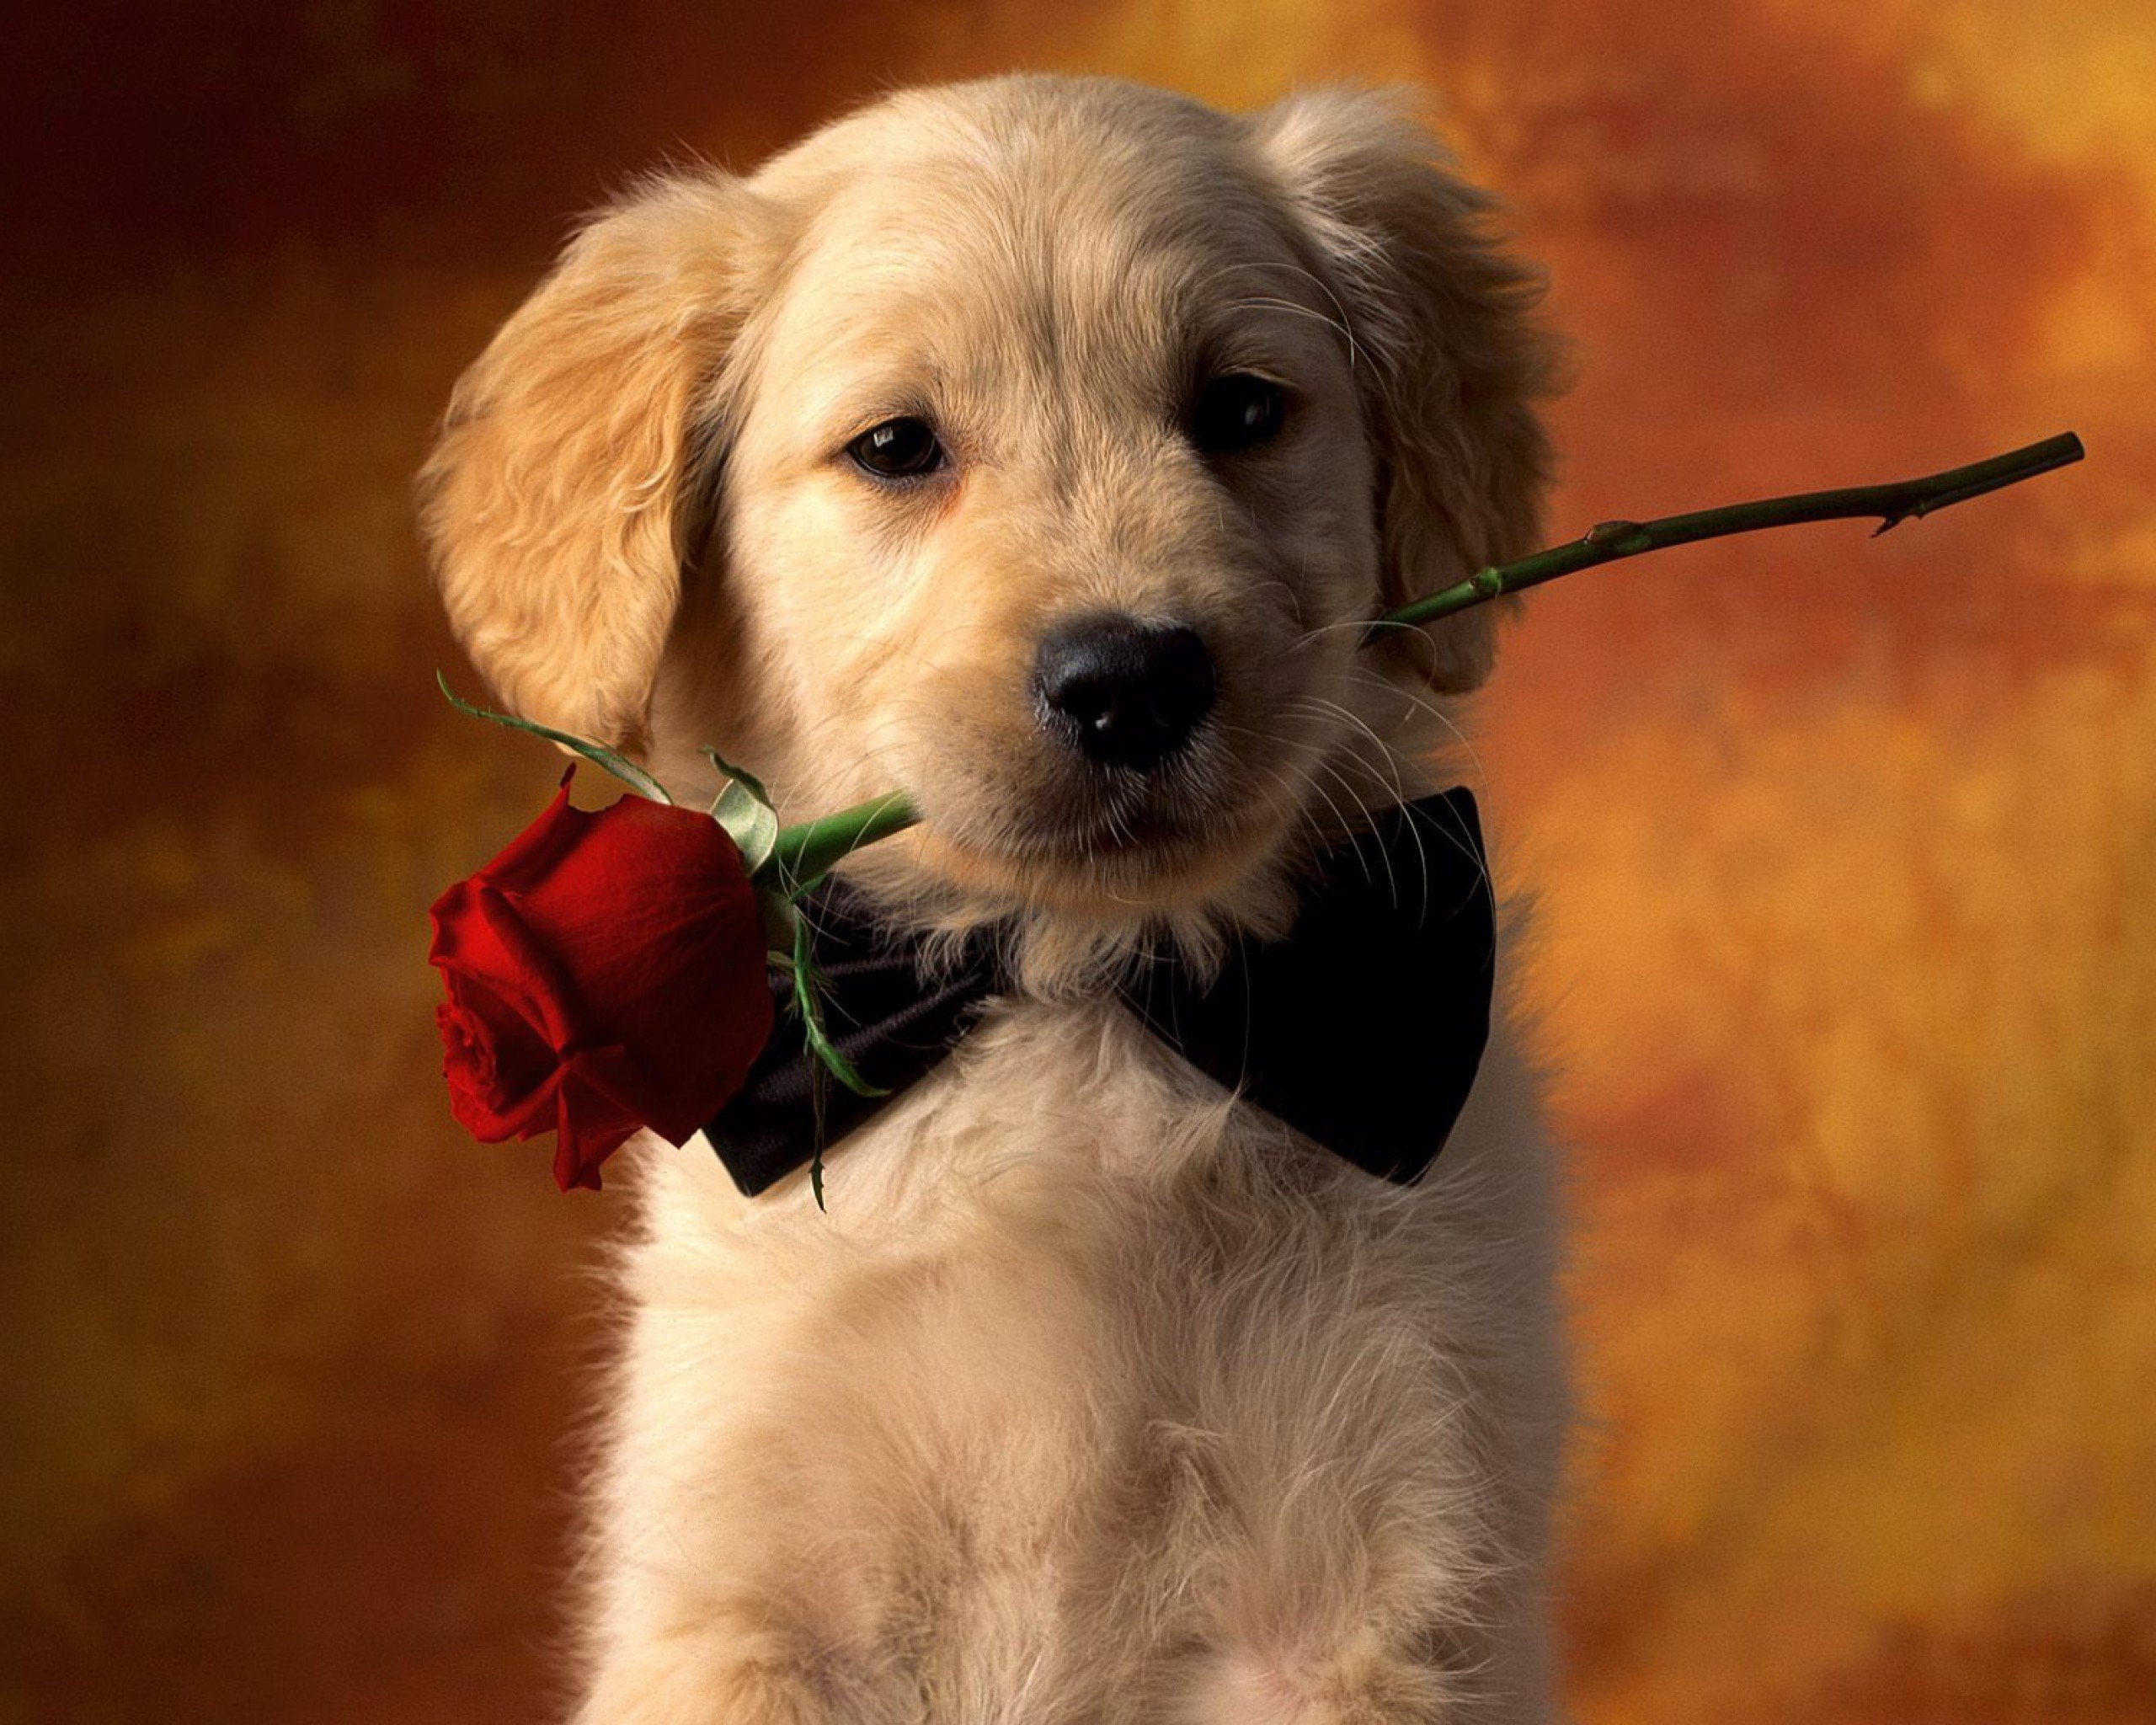 Puppy HD Wallpaper Background Image